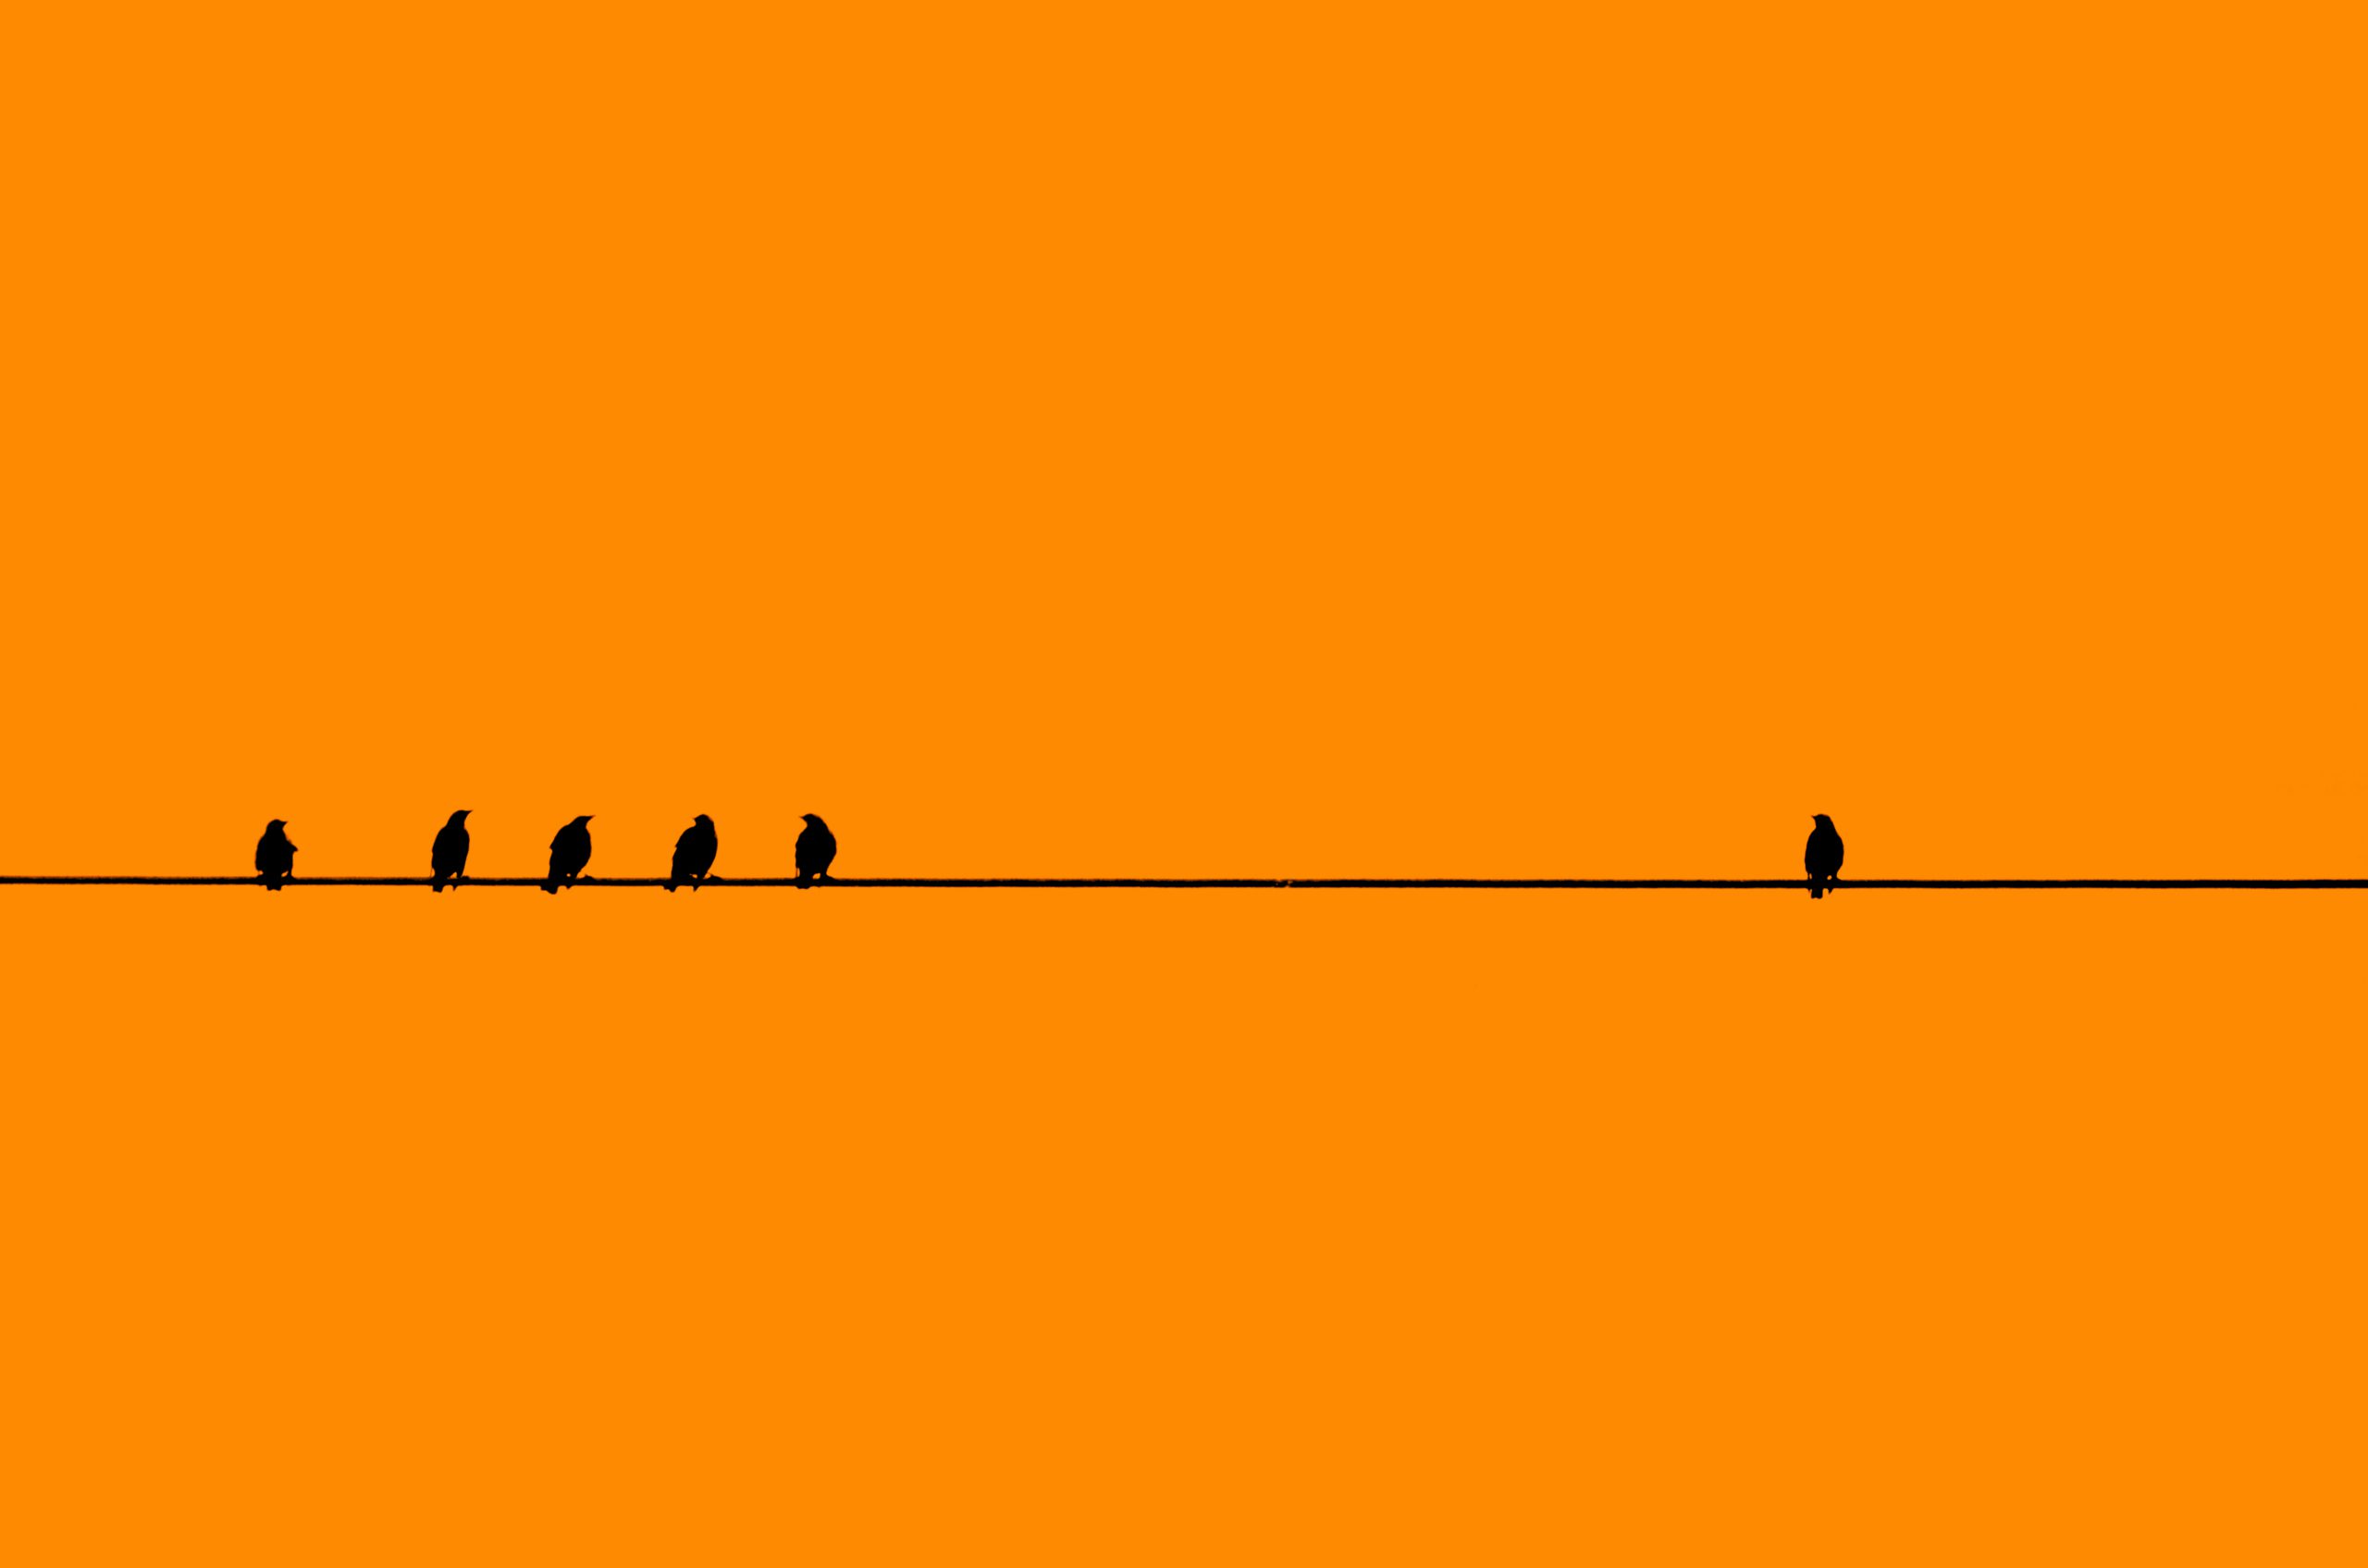 Registration - Many birds in silhouette against a orange background perching on a single cable/wire with a single bird away by itself.